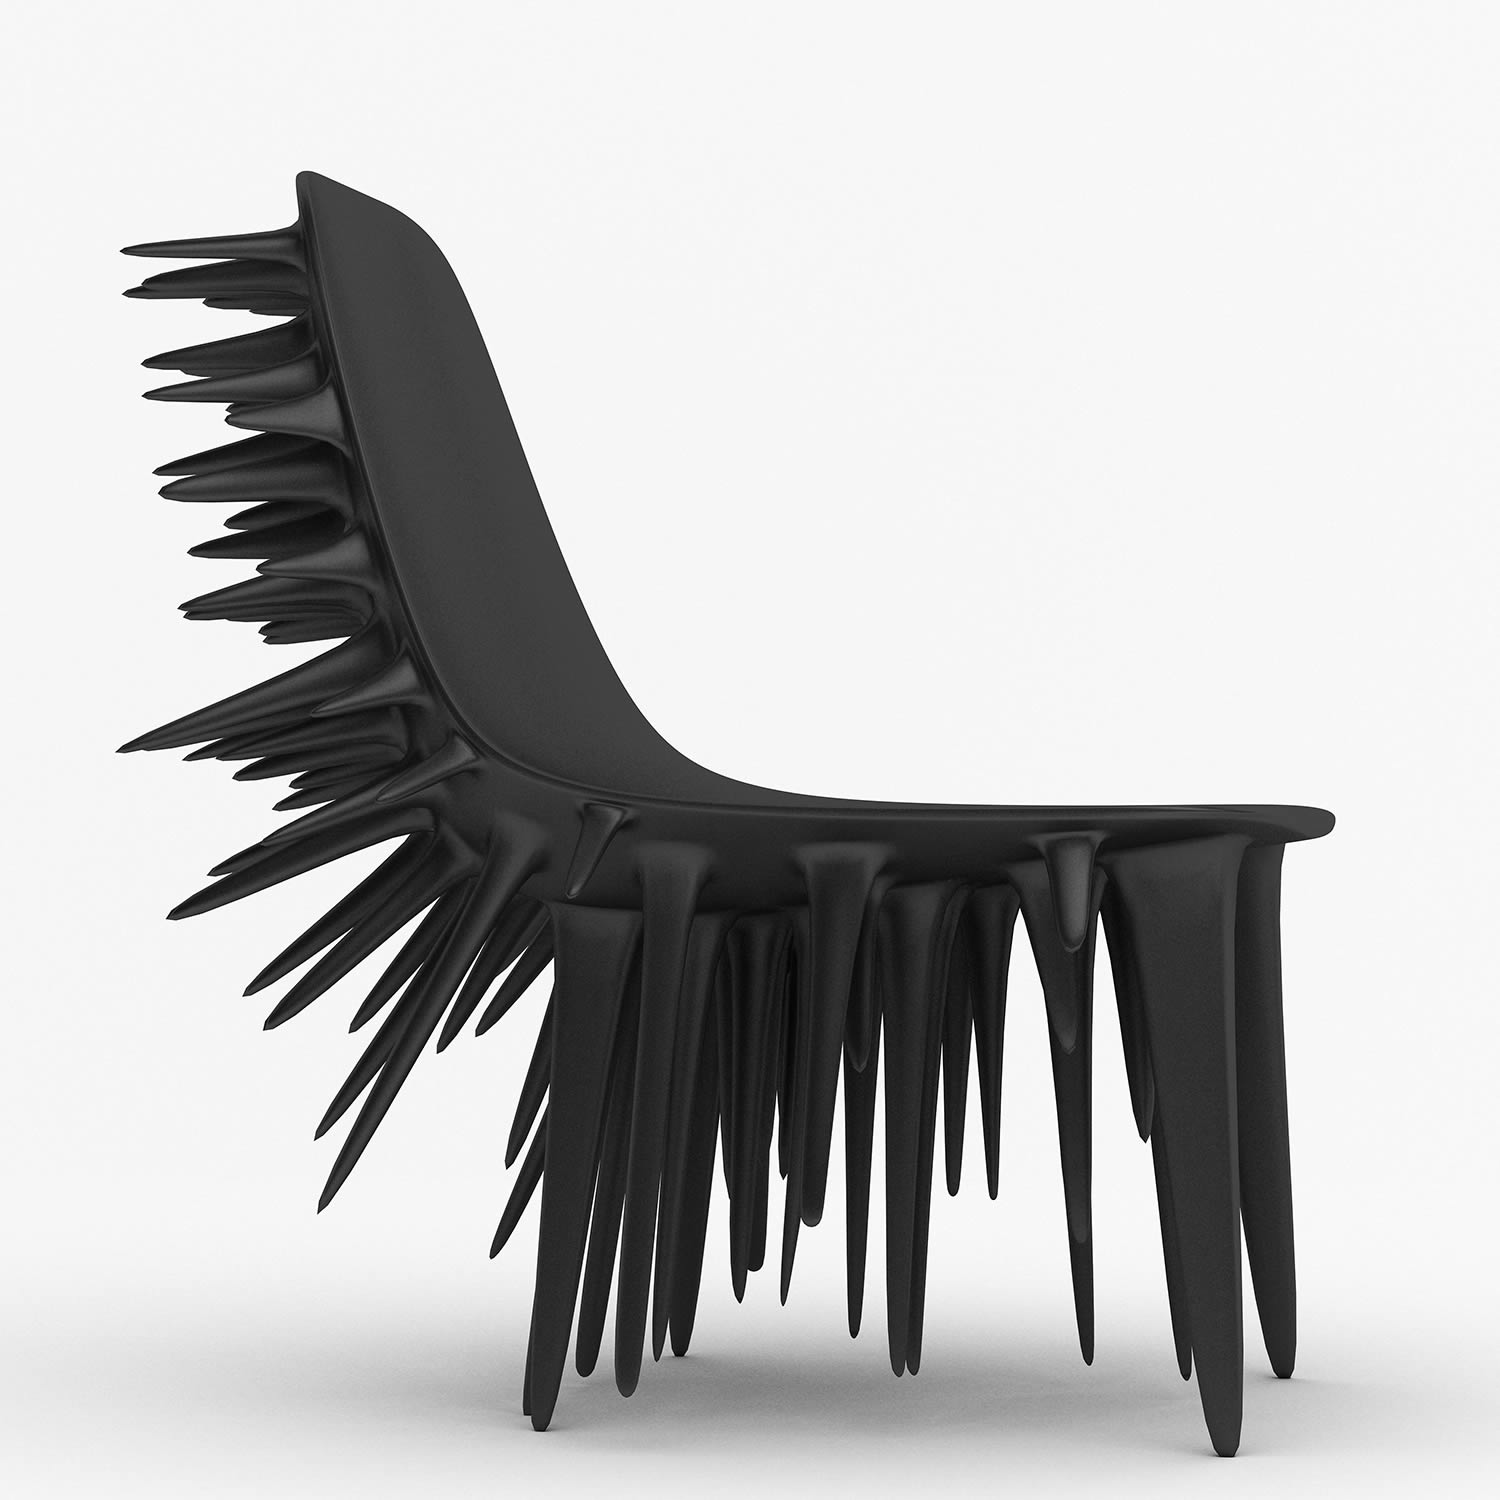 "Icicle Chair" by Ali Alavi